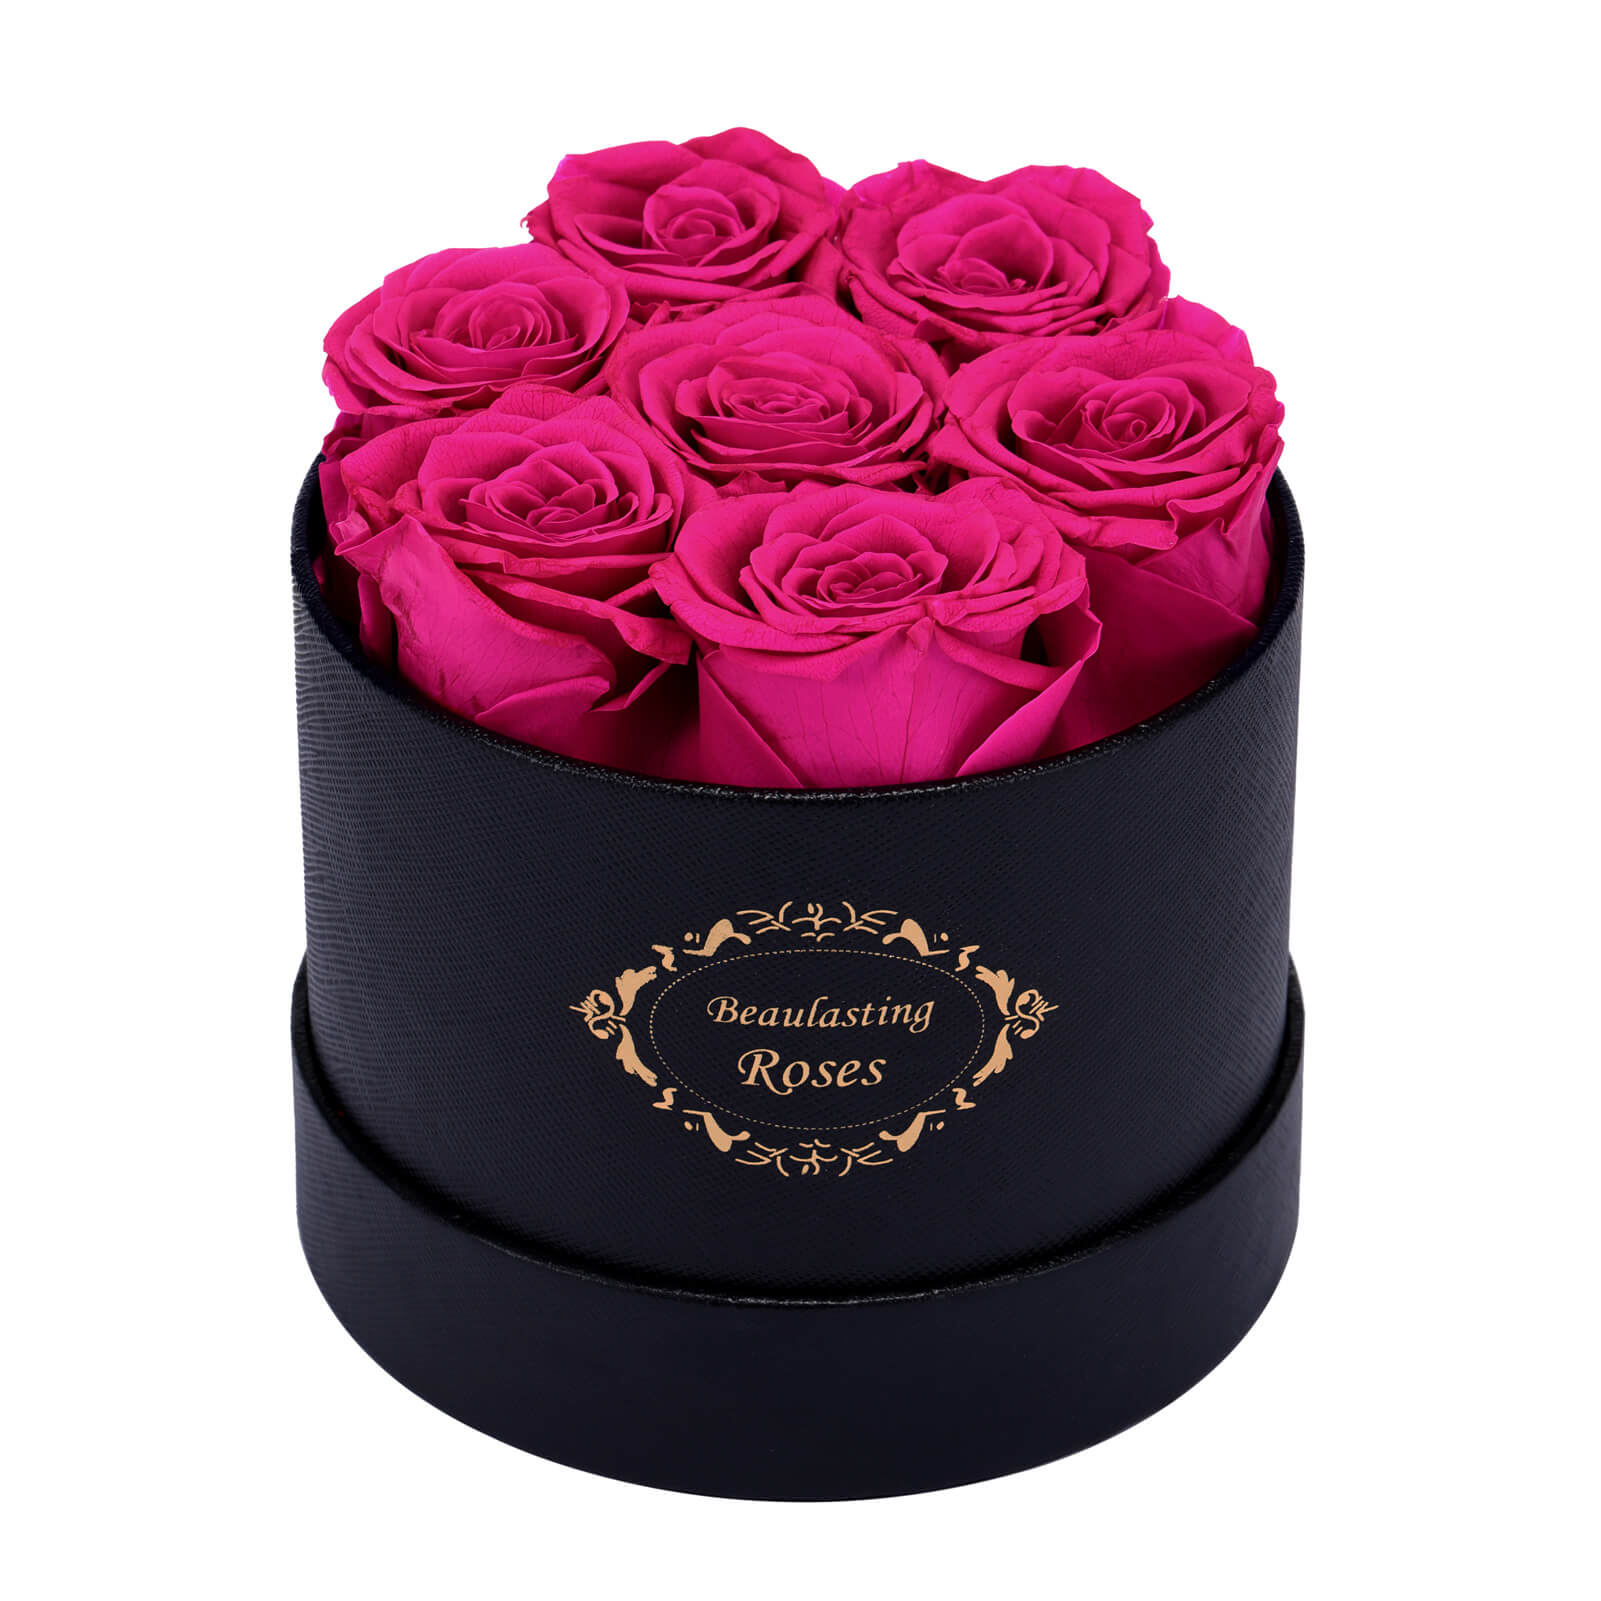 Preserved Roses That Last A Year in A Round Box Valentines Day Rose Box  Forever Flowers Roses Infinity Eternal Flower 